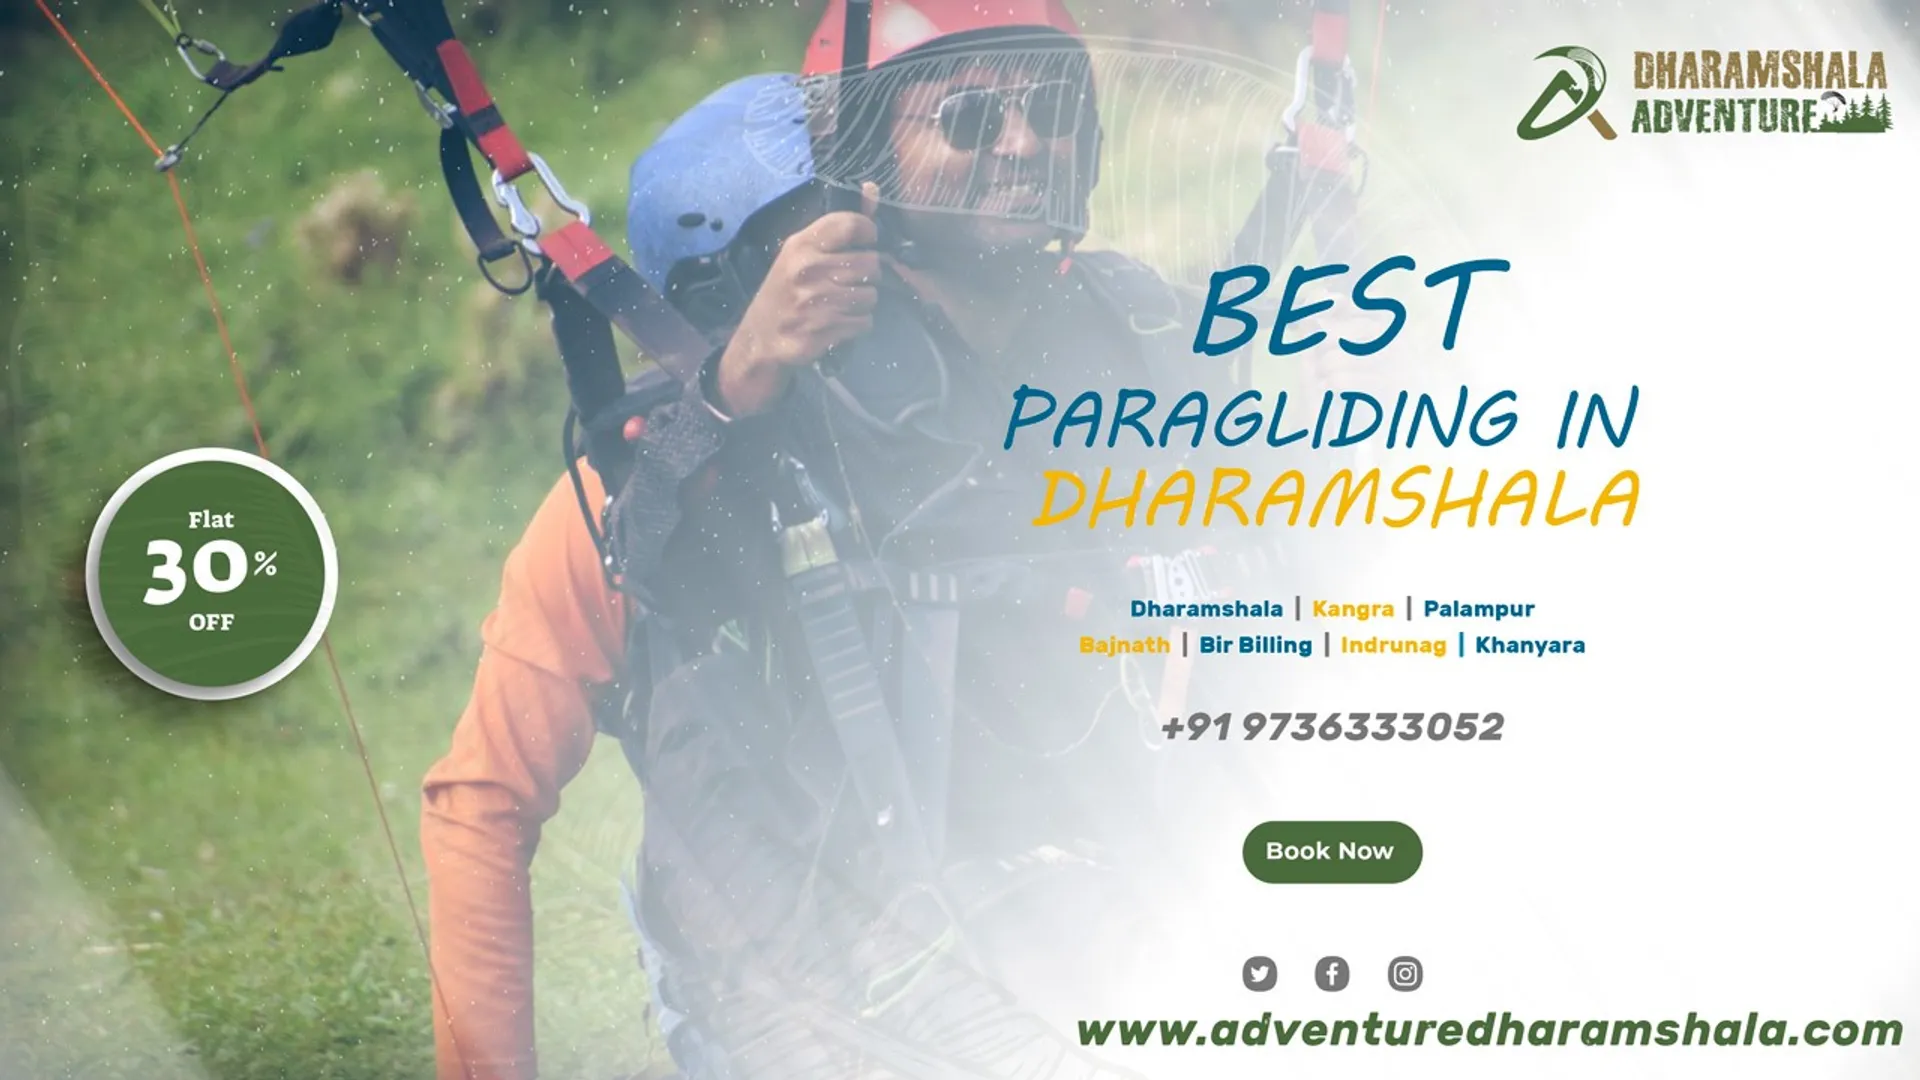 Soar into an extraordinary realm of excitement with Adventure Dharamshala! Uncover the best paragliding in Dharamshala as you ascend to the heavens and embrace awe-inspiring, panoramic spectacles of the Himalayas. Our adept and accredited mentors curate an environment of secure and exhilarating exploration, tailored for both neophytes and proficient aviators.

Contact us now. https://g.co/kgs/tqL3nD